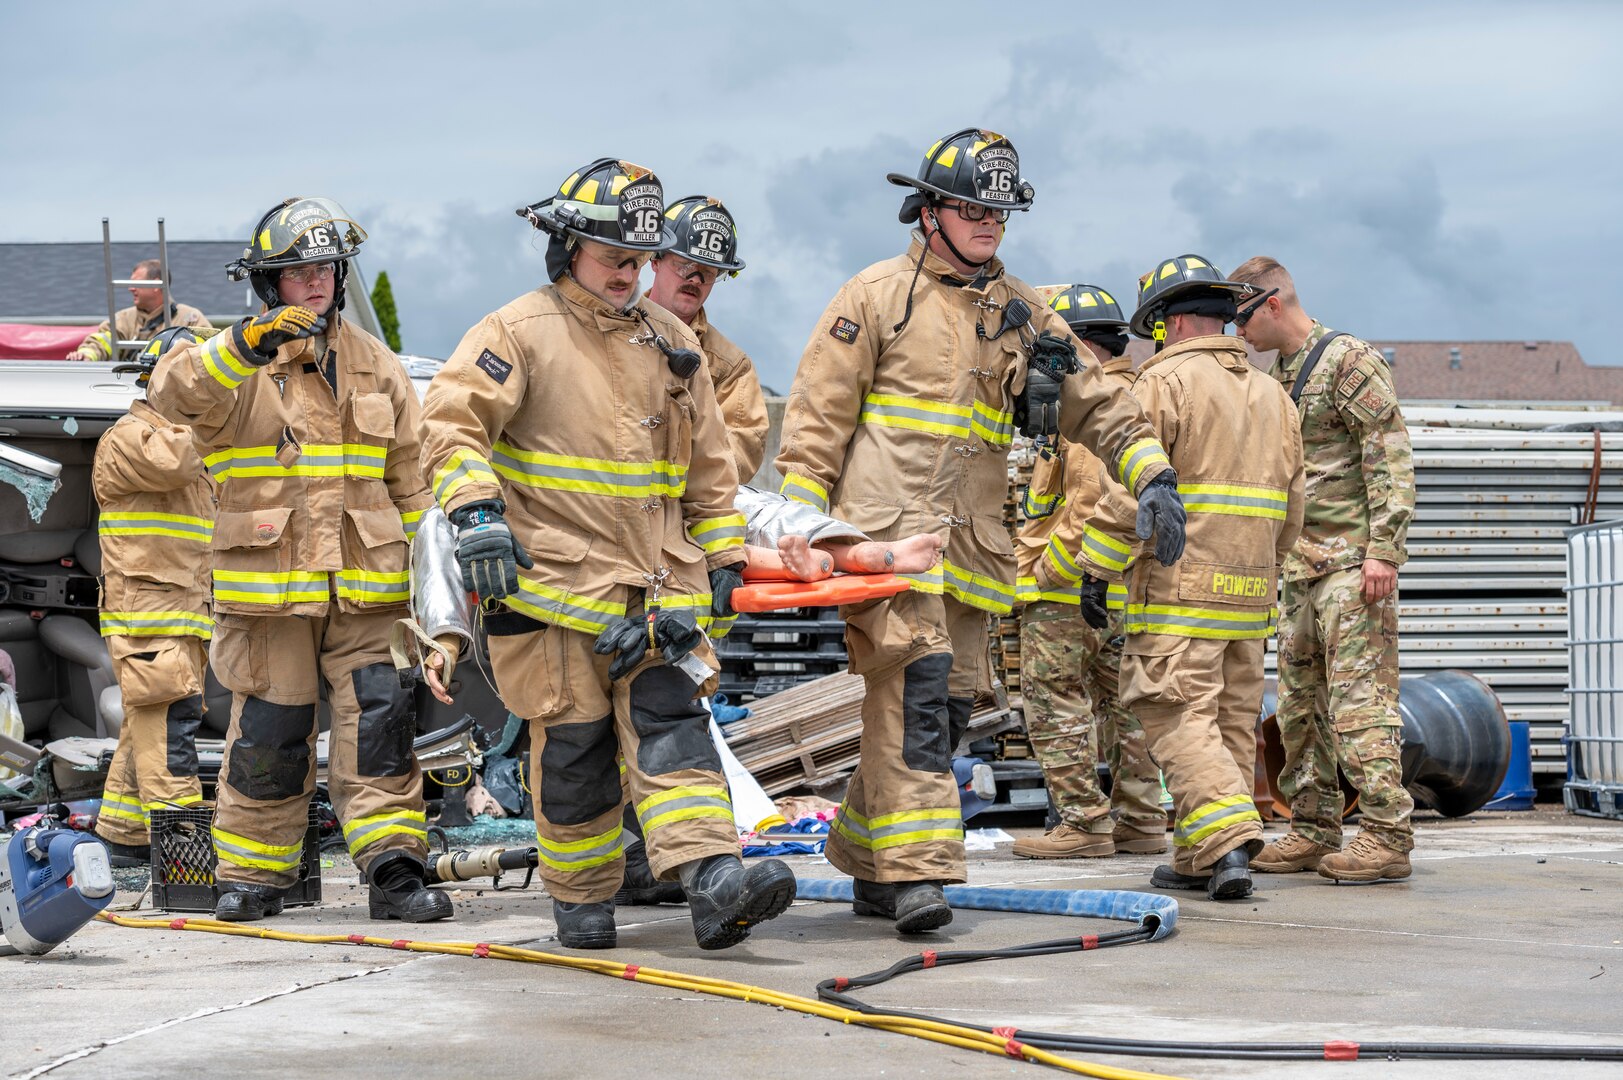 Firefighters with the 167th Airlift Wing carry a simulated patient on a stretcher for medical care after rescuing the victim from a vehicle accident during a vehicle extrication exercise at the 167th Airlift Wing, Martinsburg, West Virginia, June 11, 2022. The training exercise involved the response and rescue of a trapped victim in a vehicle accident.